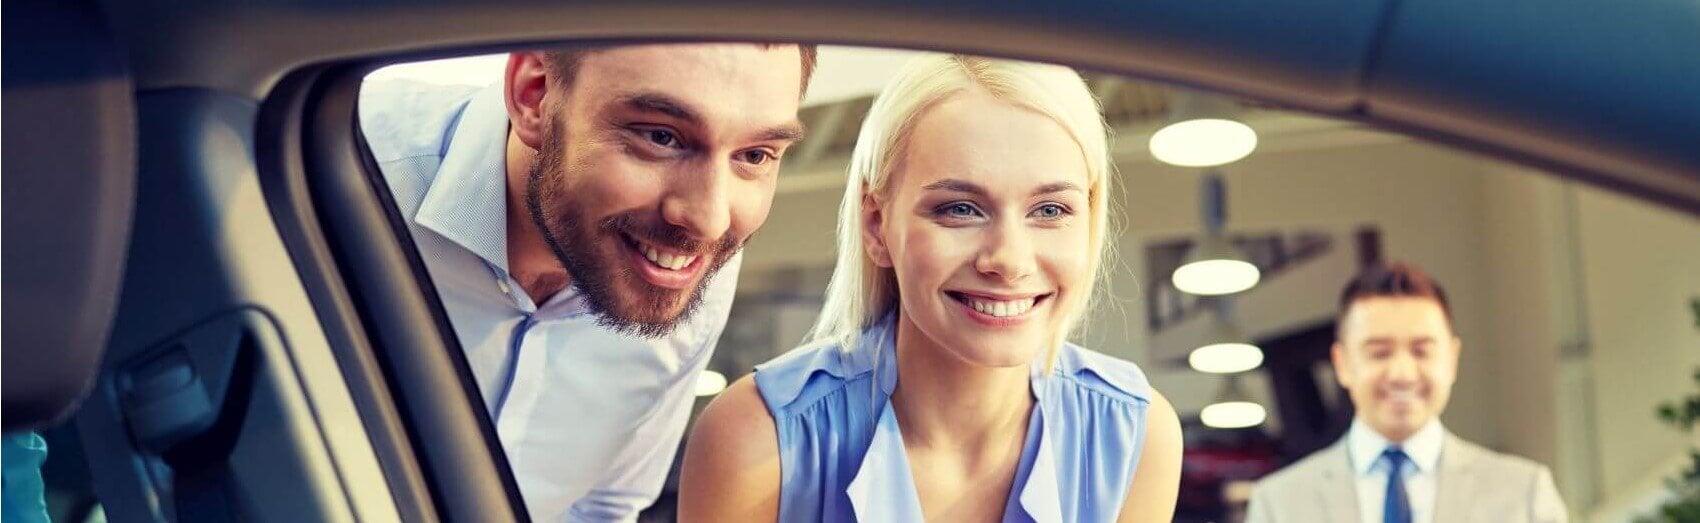 Couple Looking in Car Window Banner